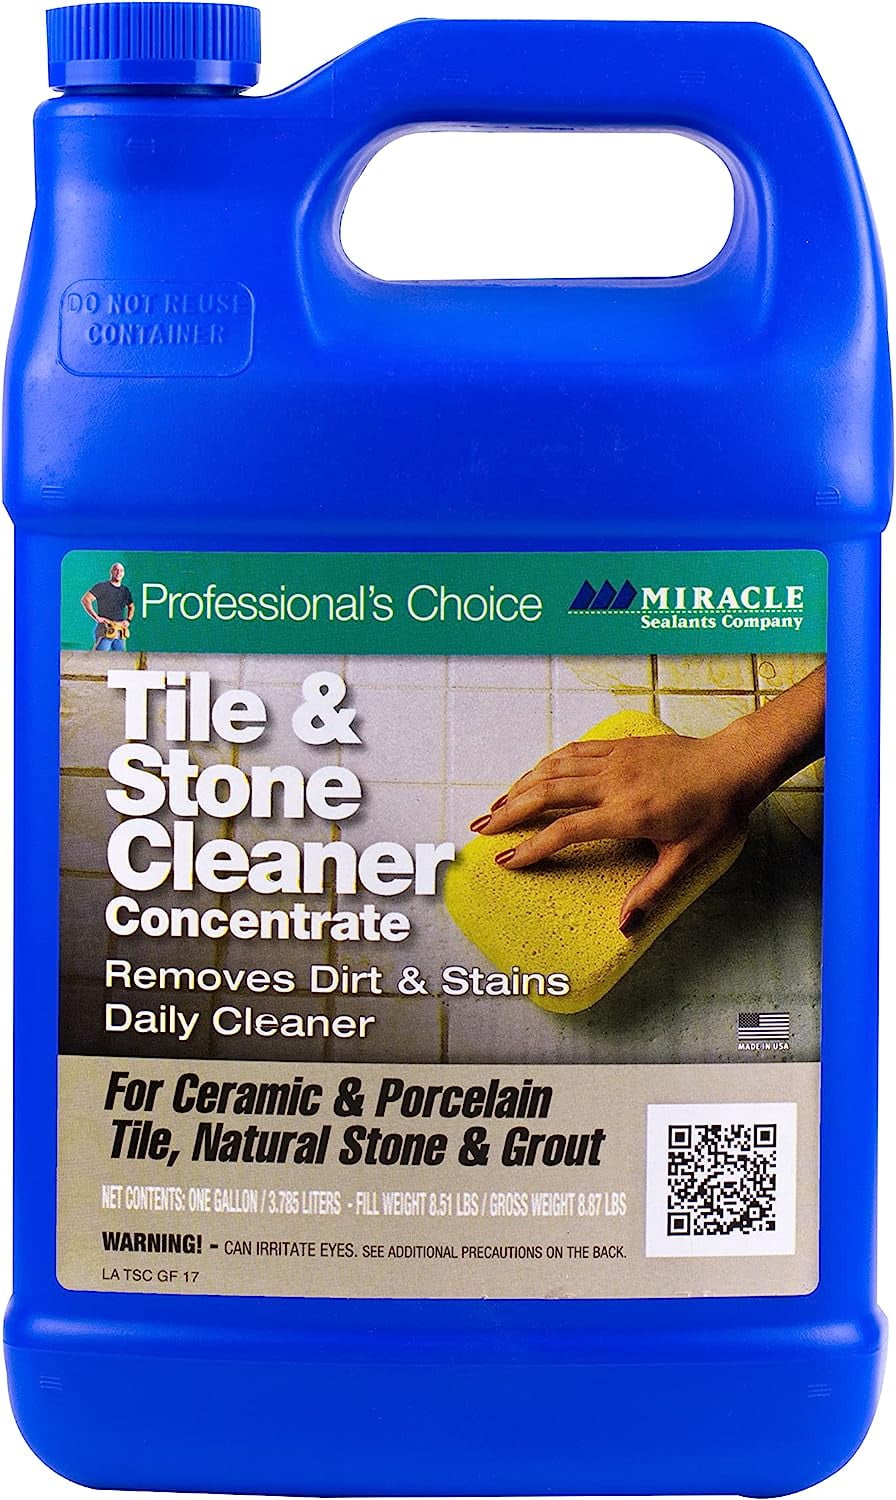  Zep Grout Cleaner and Brightener - 32 oz (Case of 2) - ZU104632  - Deep Cleaning Formula Removes Old Stains From Grout : Health & Household